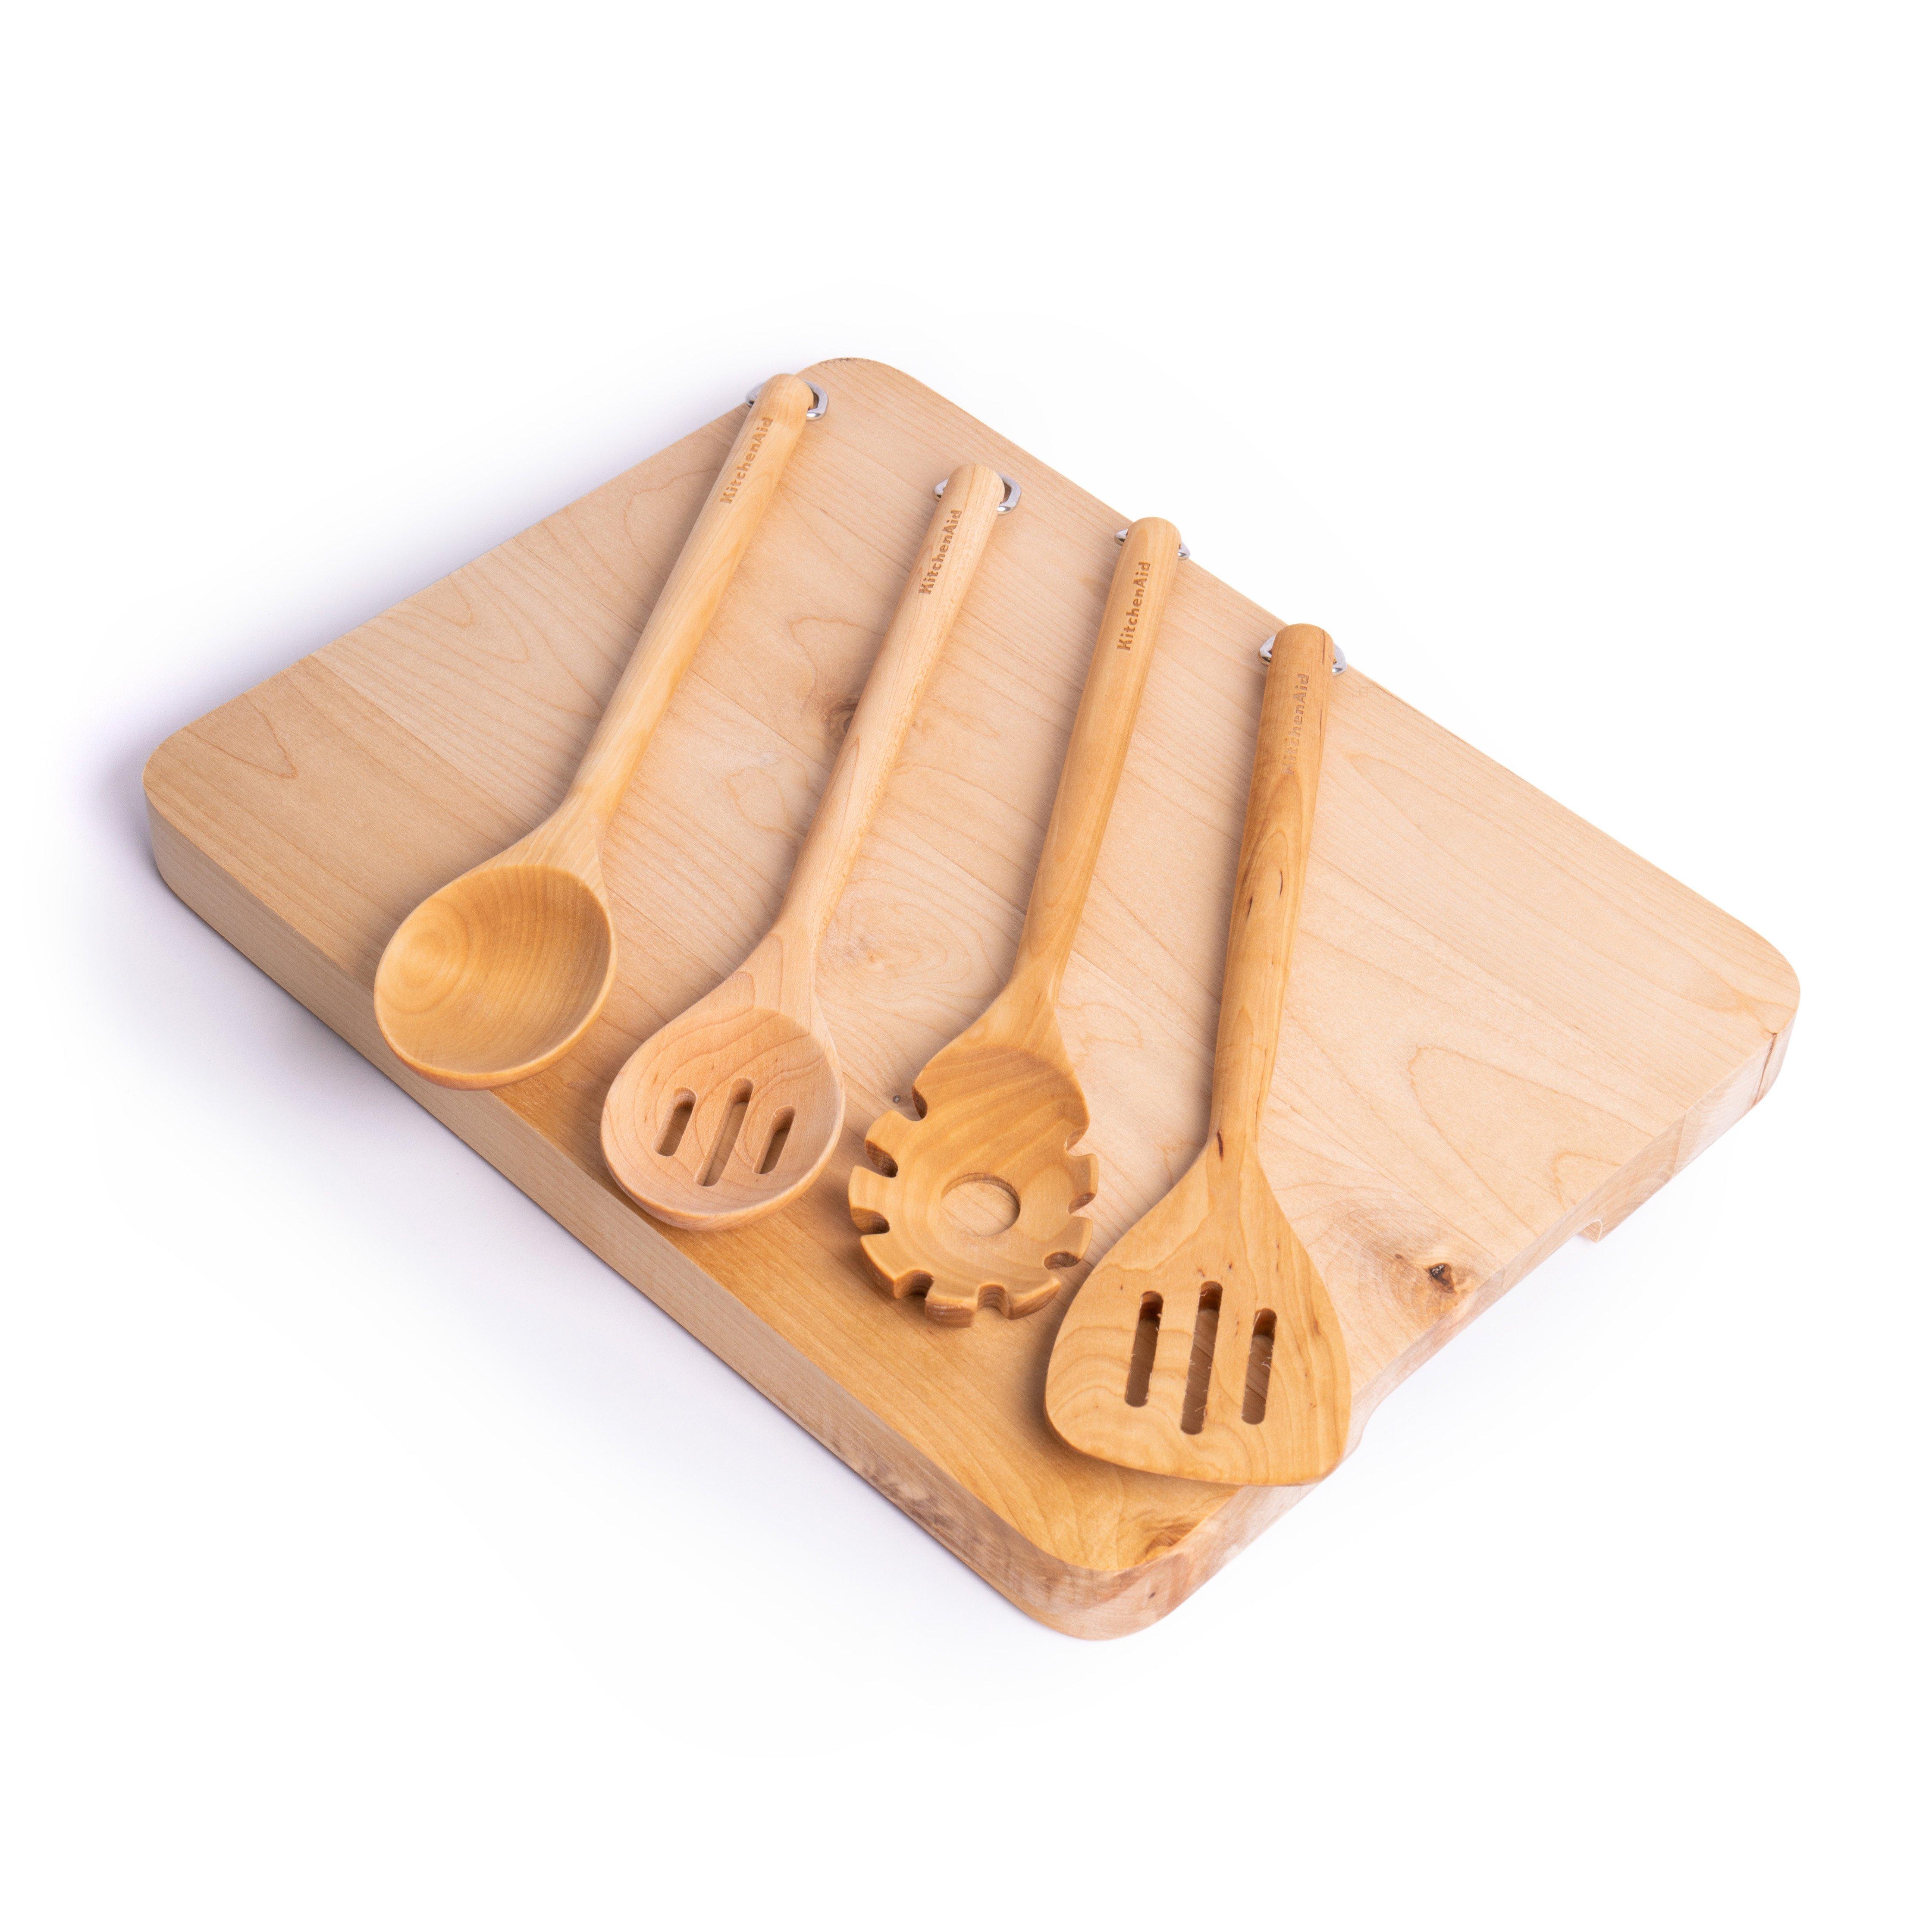 5pc Eco-Friendly Birchwood Kitchen Set with Chopping Board, Solid Turner, Slotted Turner, Slotted Sp